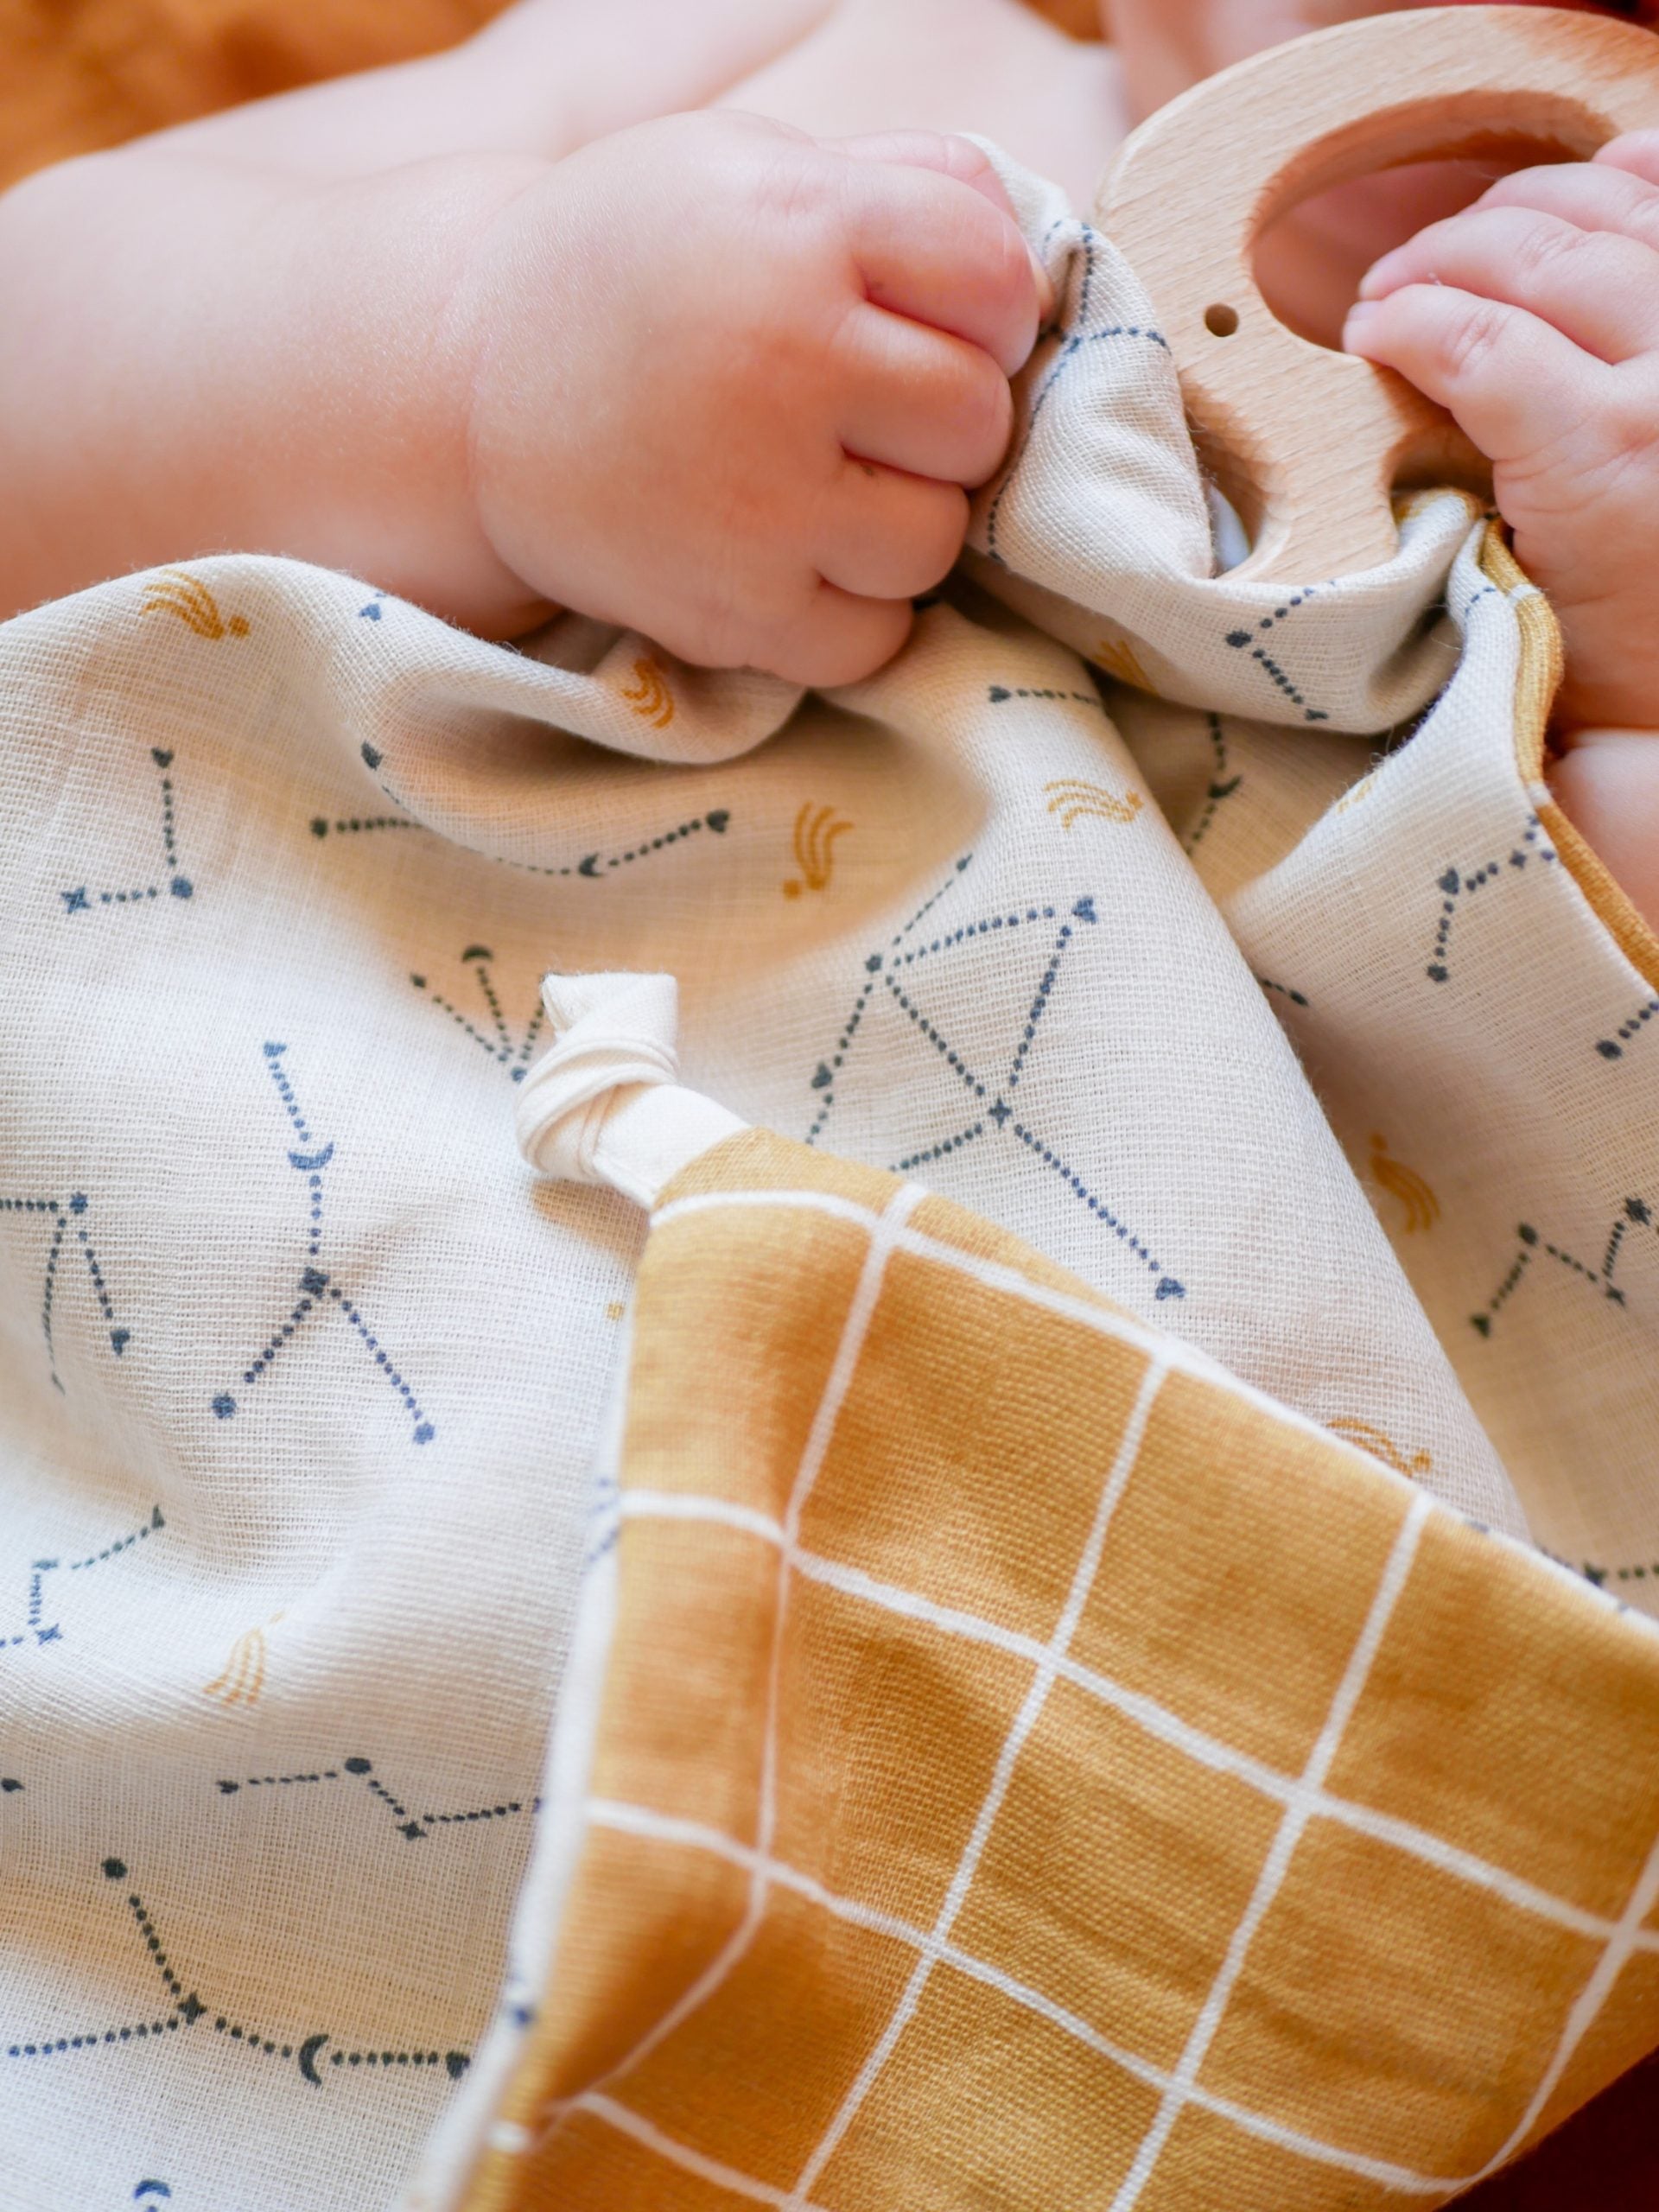 The comforter - Baby capsule collection